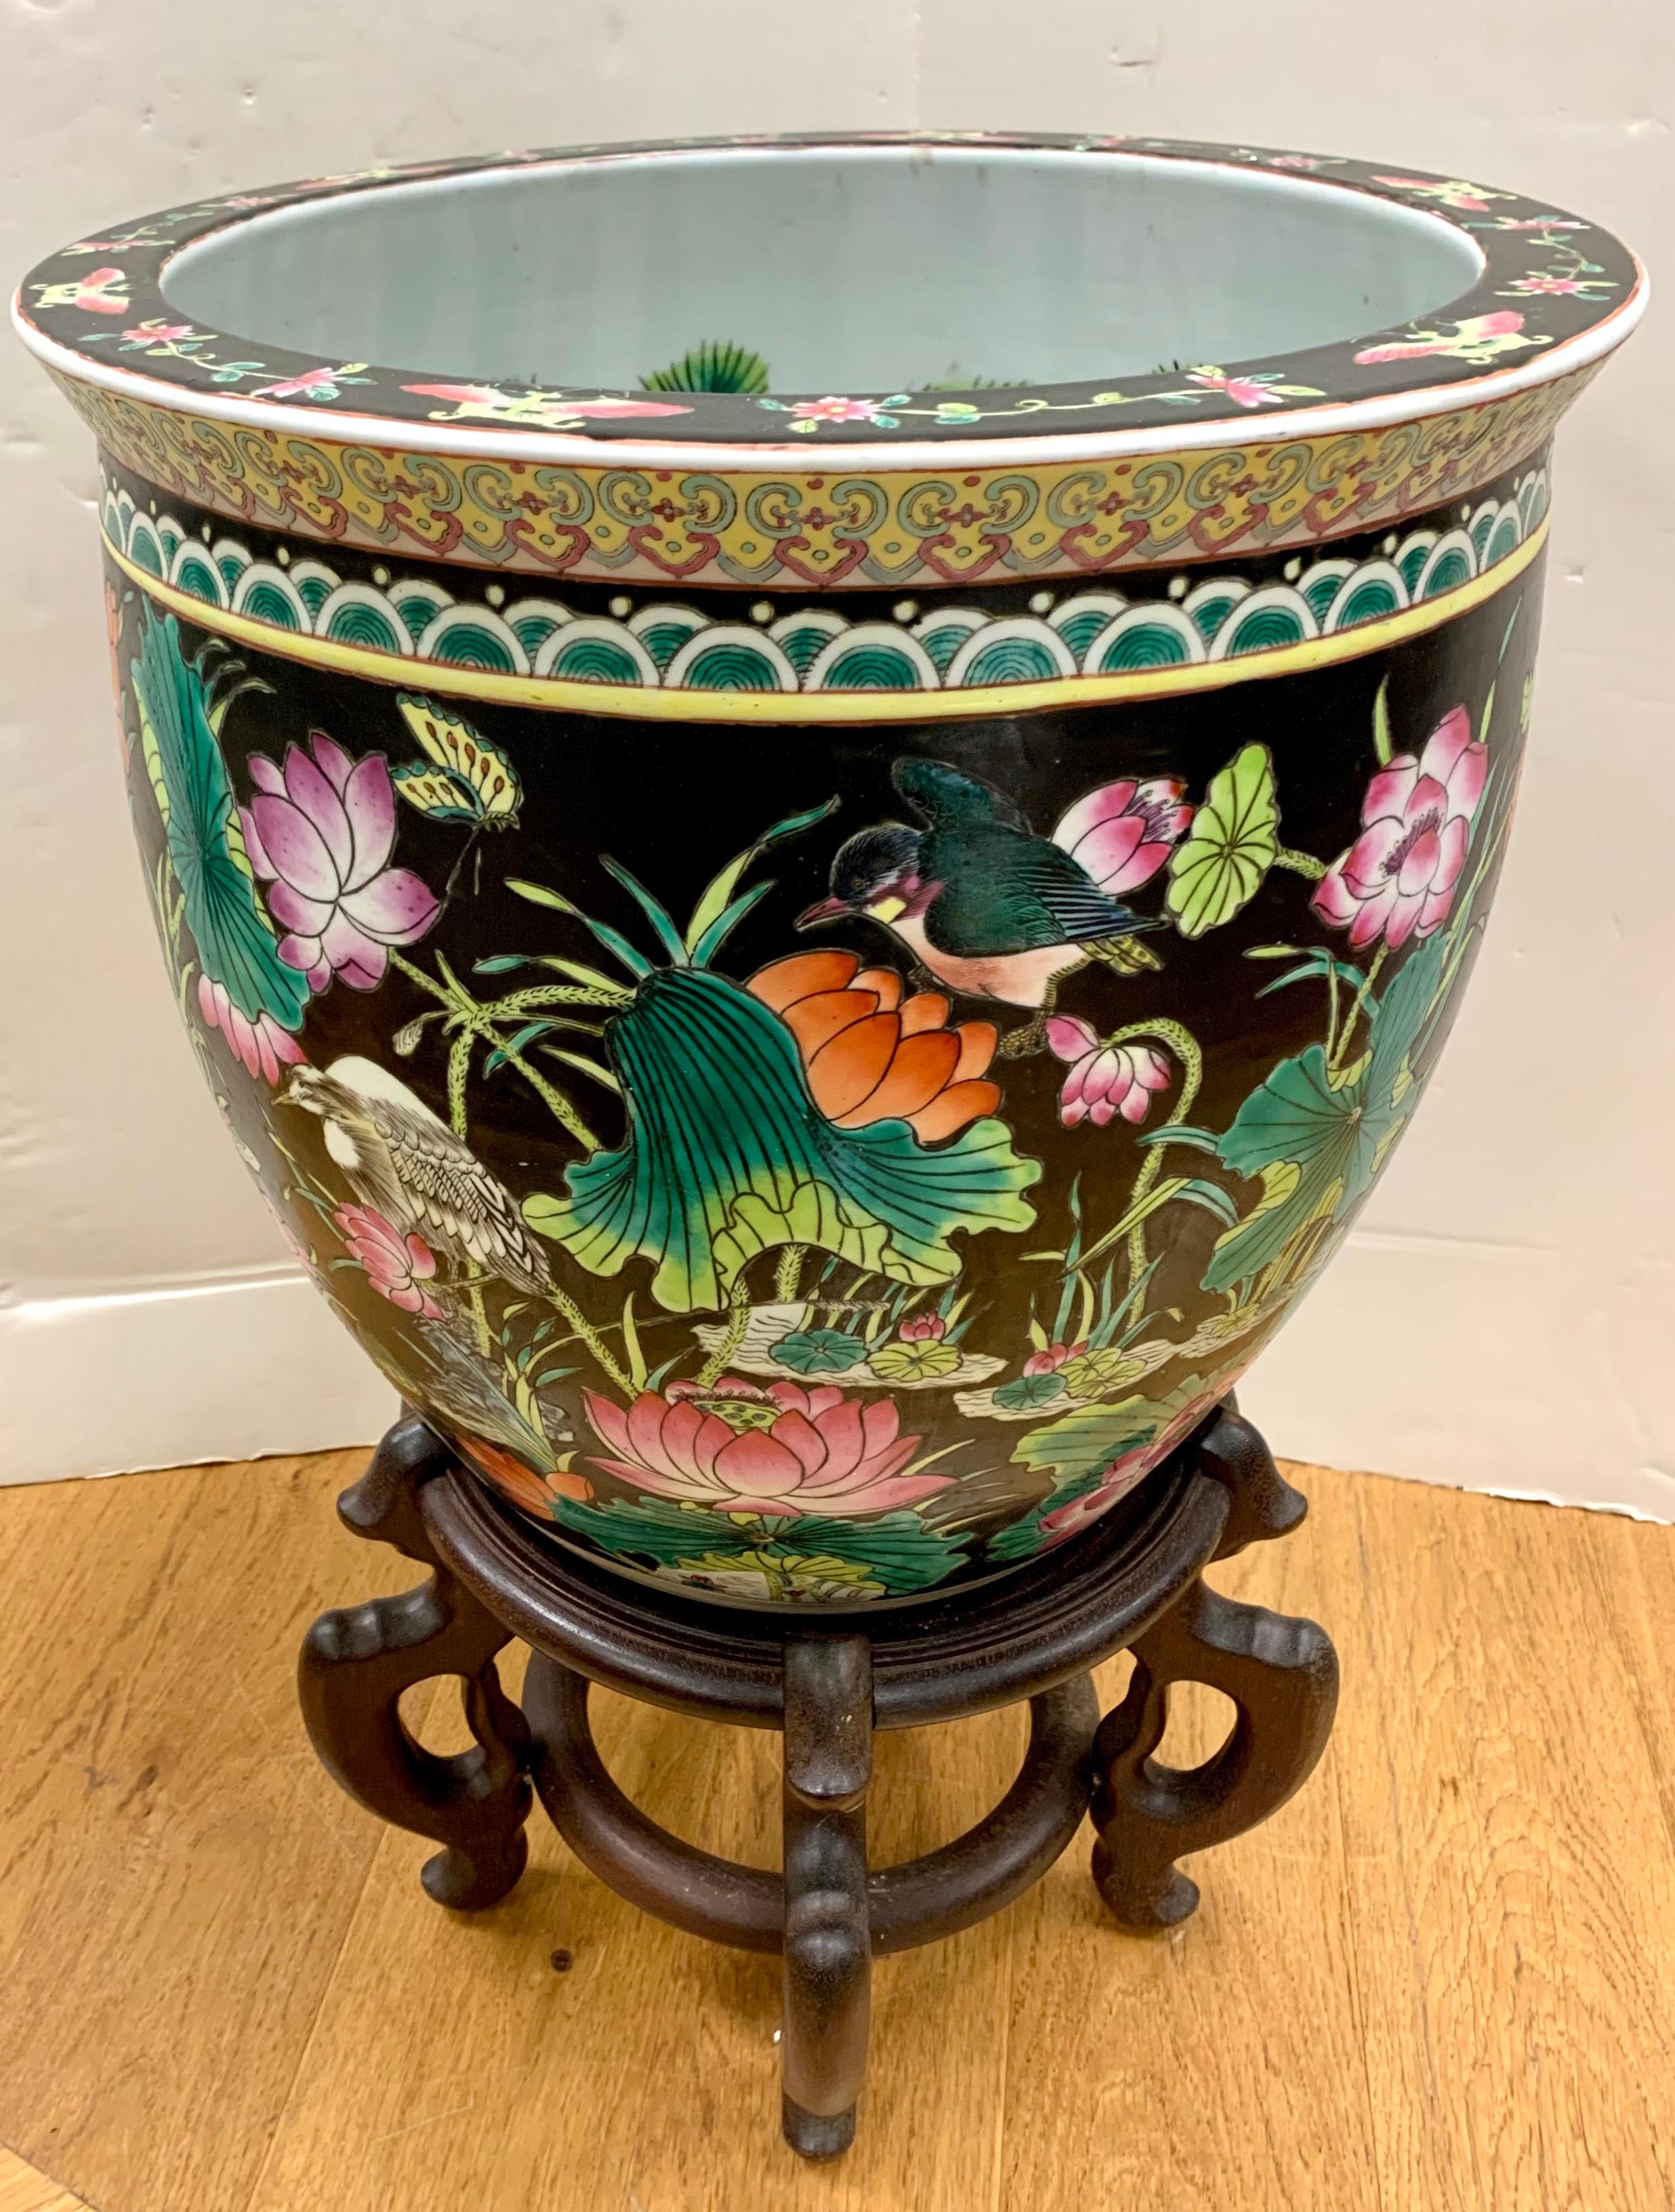 Beautiful Chinese porcelain planter painted with colorful florals and greenery on a black ground on the exterior. Interior has painted fish amidst seaweed. The fishbowl sits atop a carved wooden pedestal.
Fishbowl 16” W x 14.5” H.